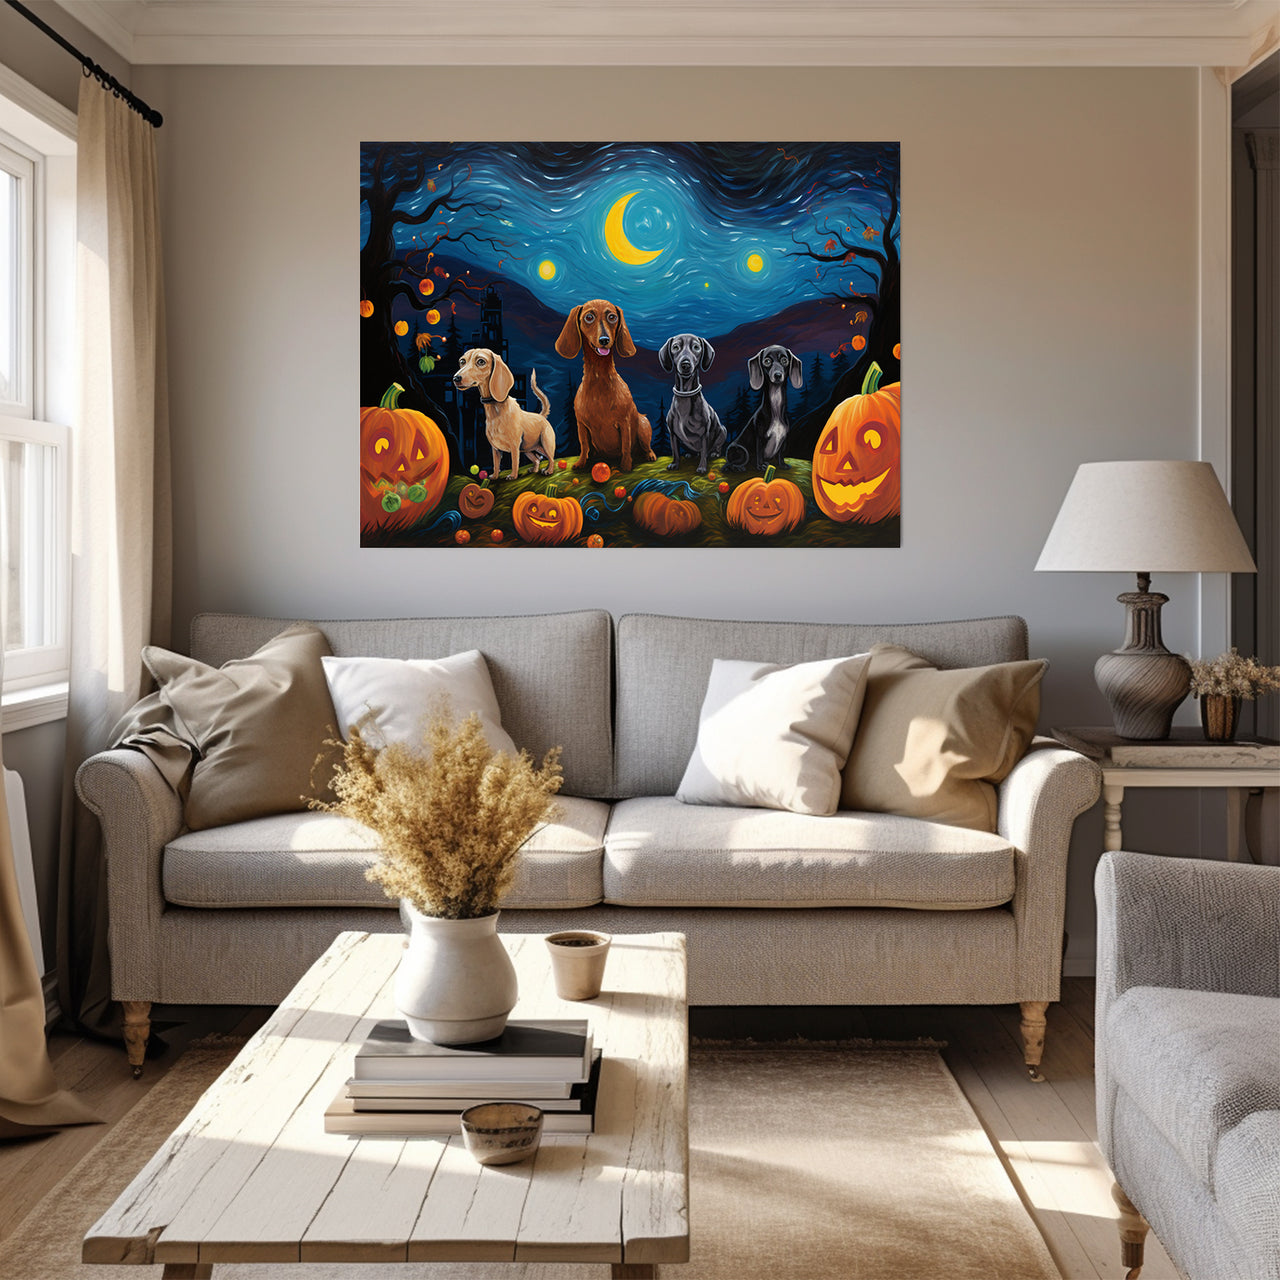 Dachshunds Dogs Halloween With Pumpkin Oil Painting Van Goh Style, Wooden Canvas Prints Wall Art Painting , Canvas 3d Art